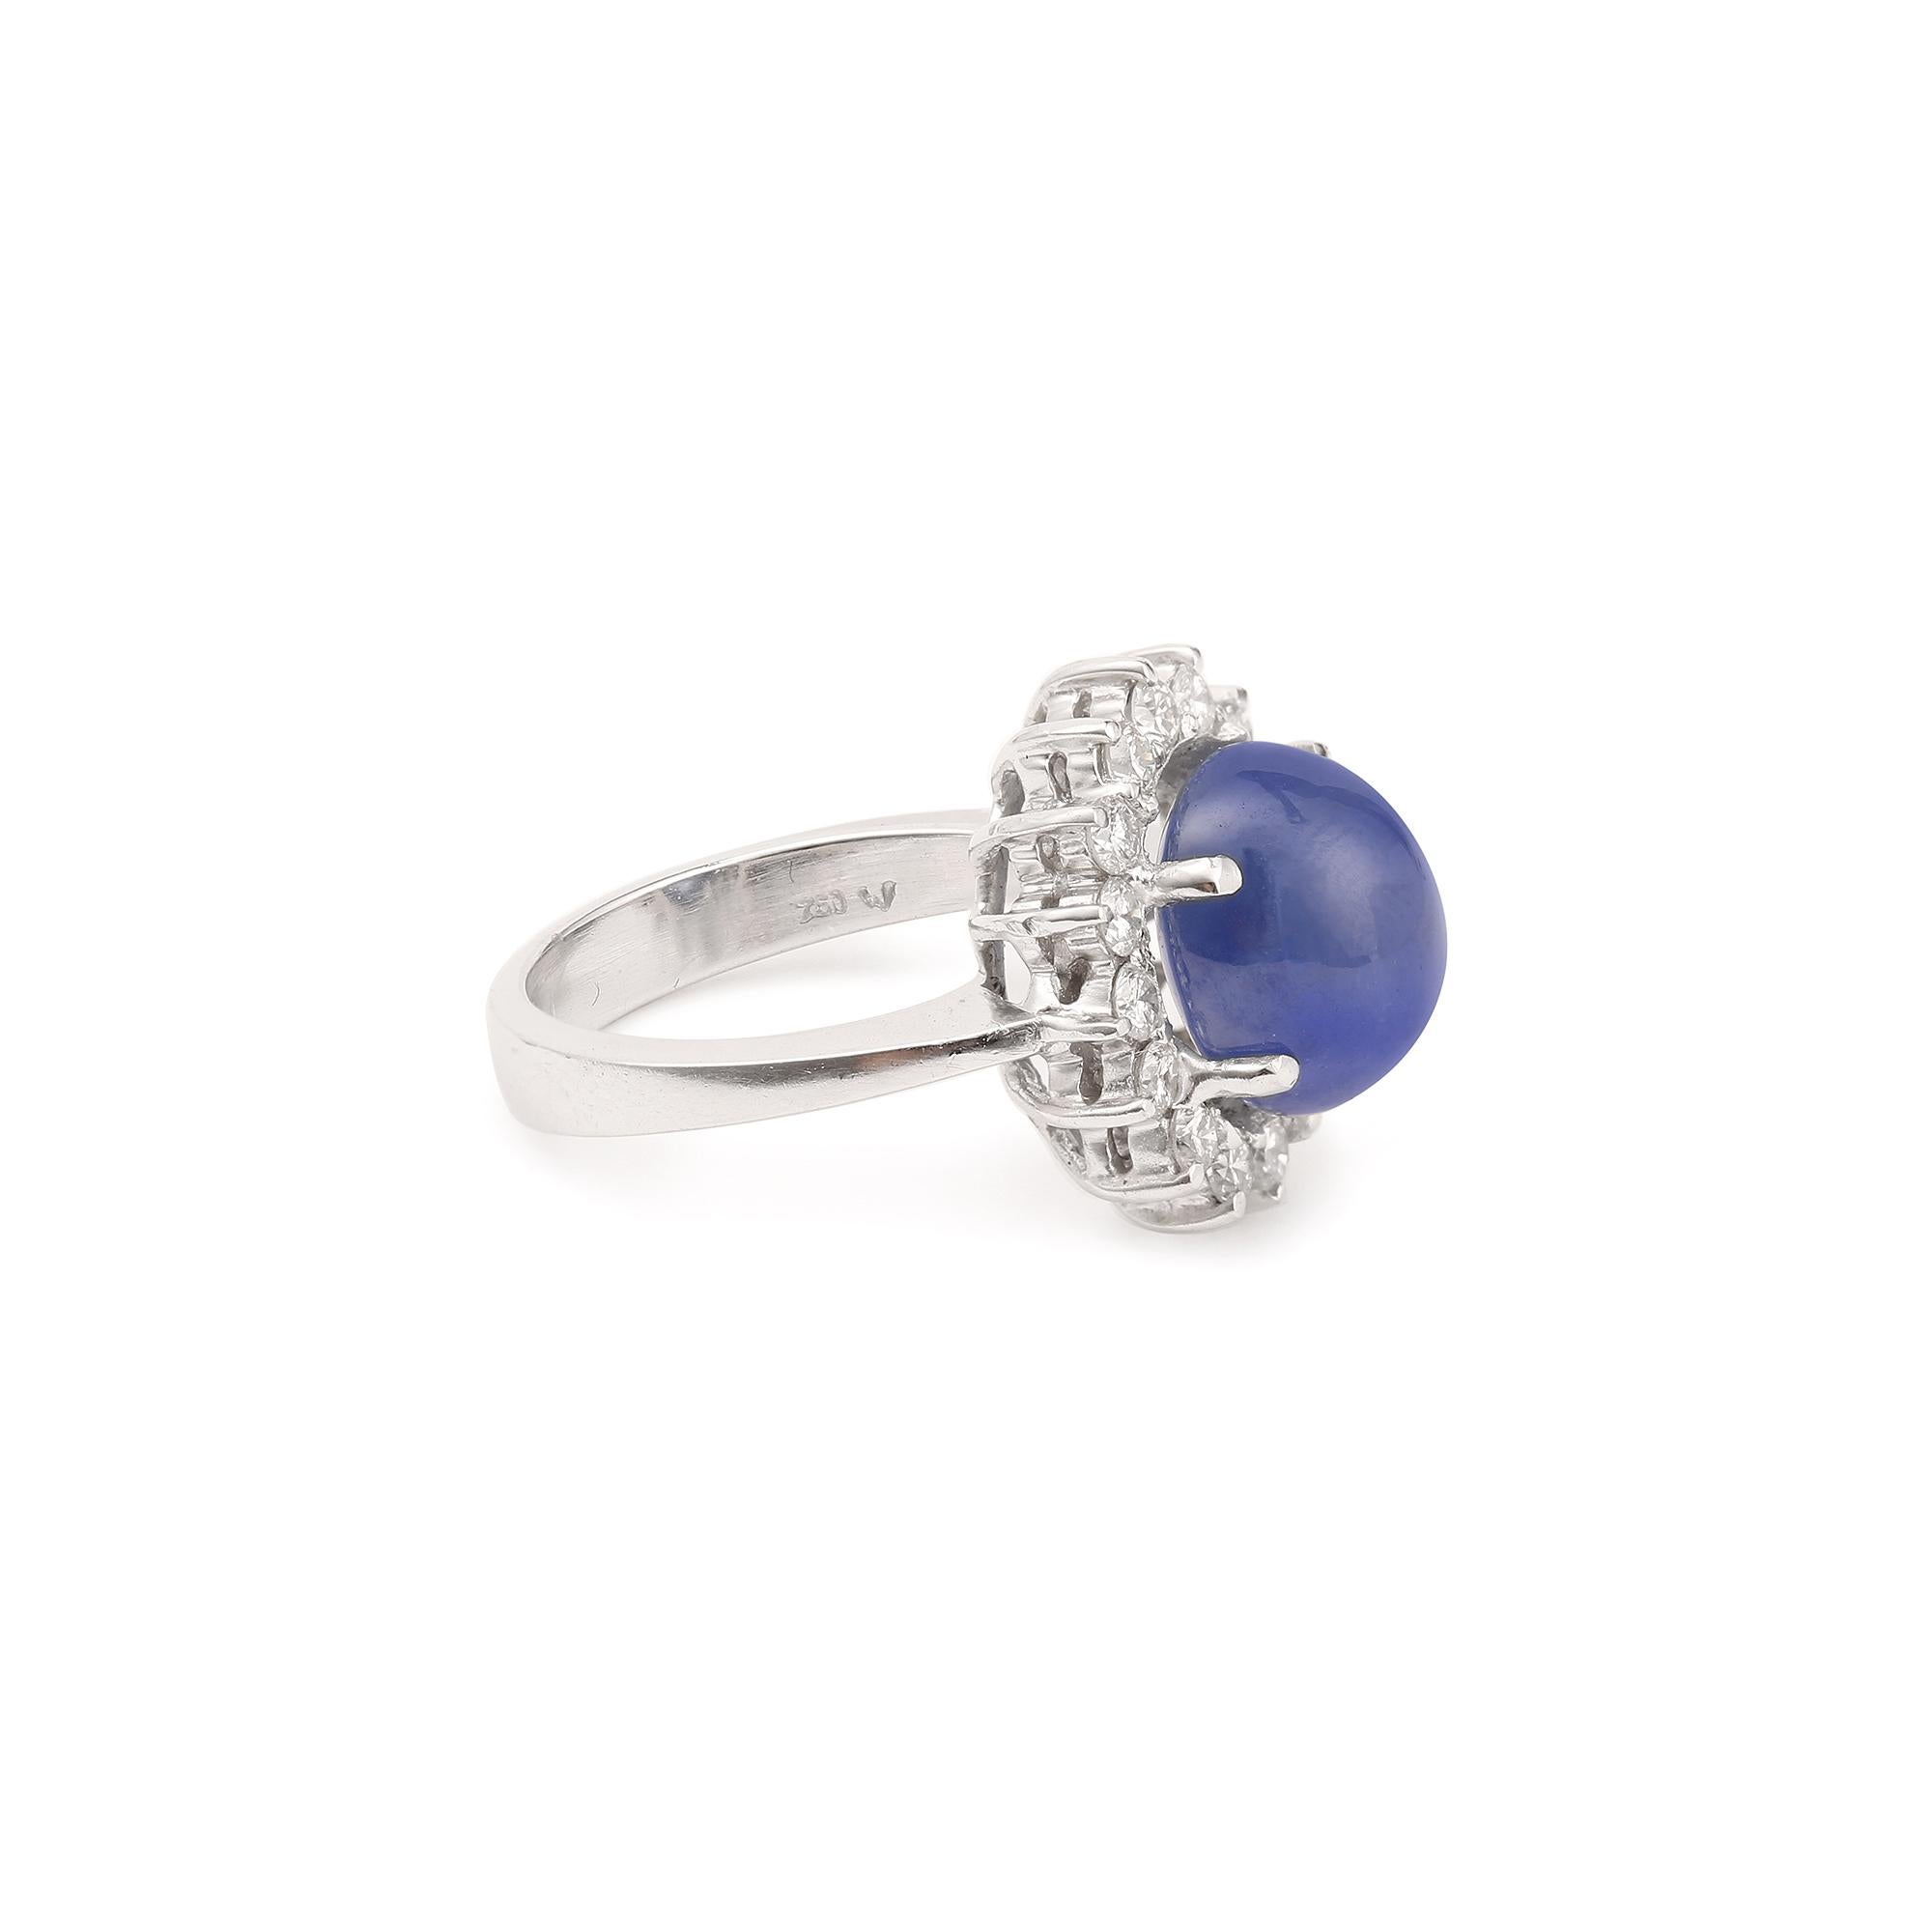 Original pompadour ring in white gold set with brilliant cut diamonds and a cabochon sapphire.

Estimated weight of the sapphire : 6 carats

Total estimated weight of diamonds : 0.35 carats

Dimensions : 16.19 x 14.12 x 10.96 mm (0.637 x 0.556 x